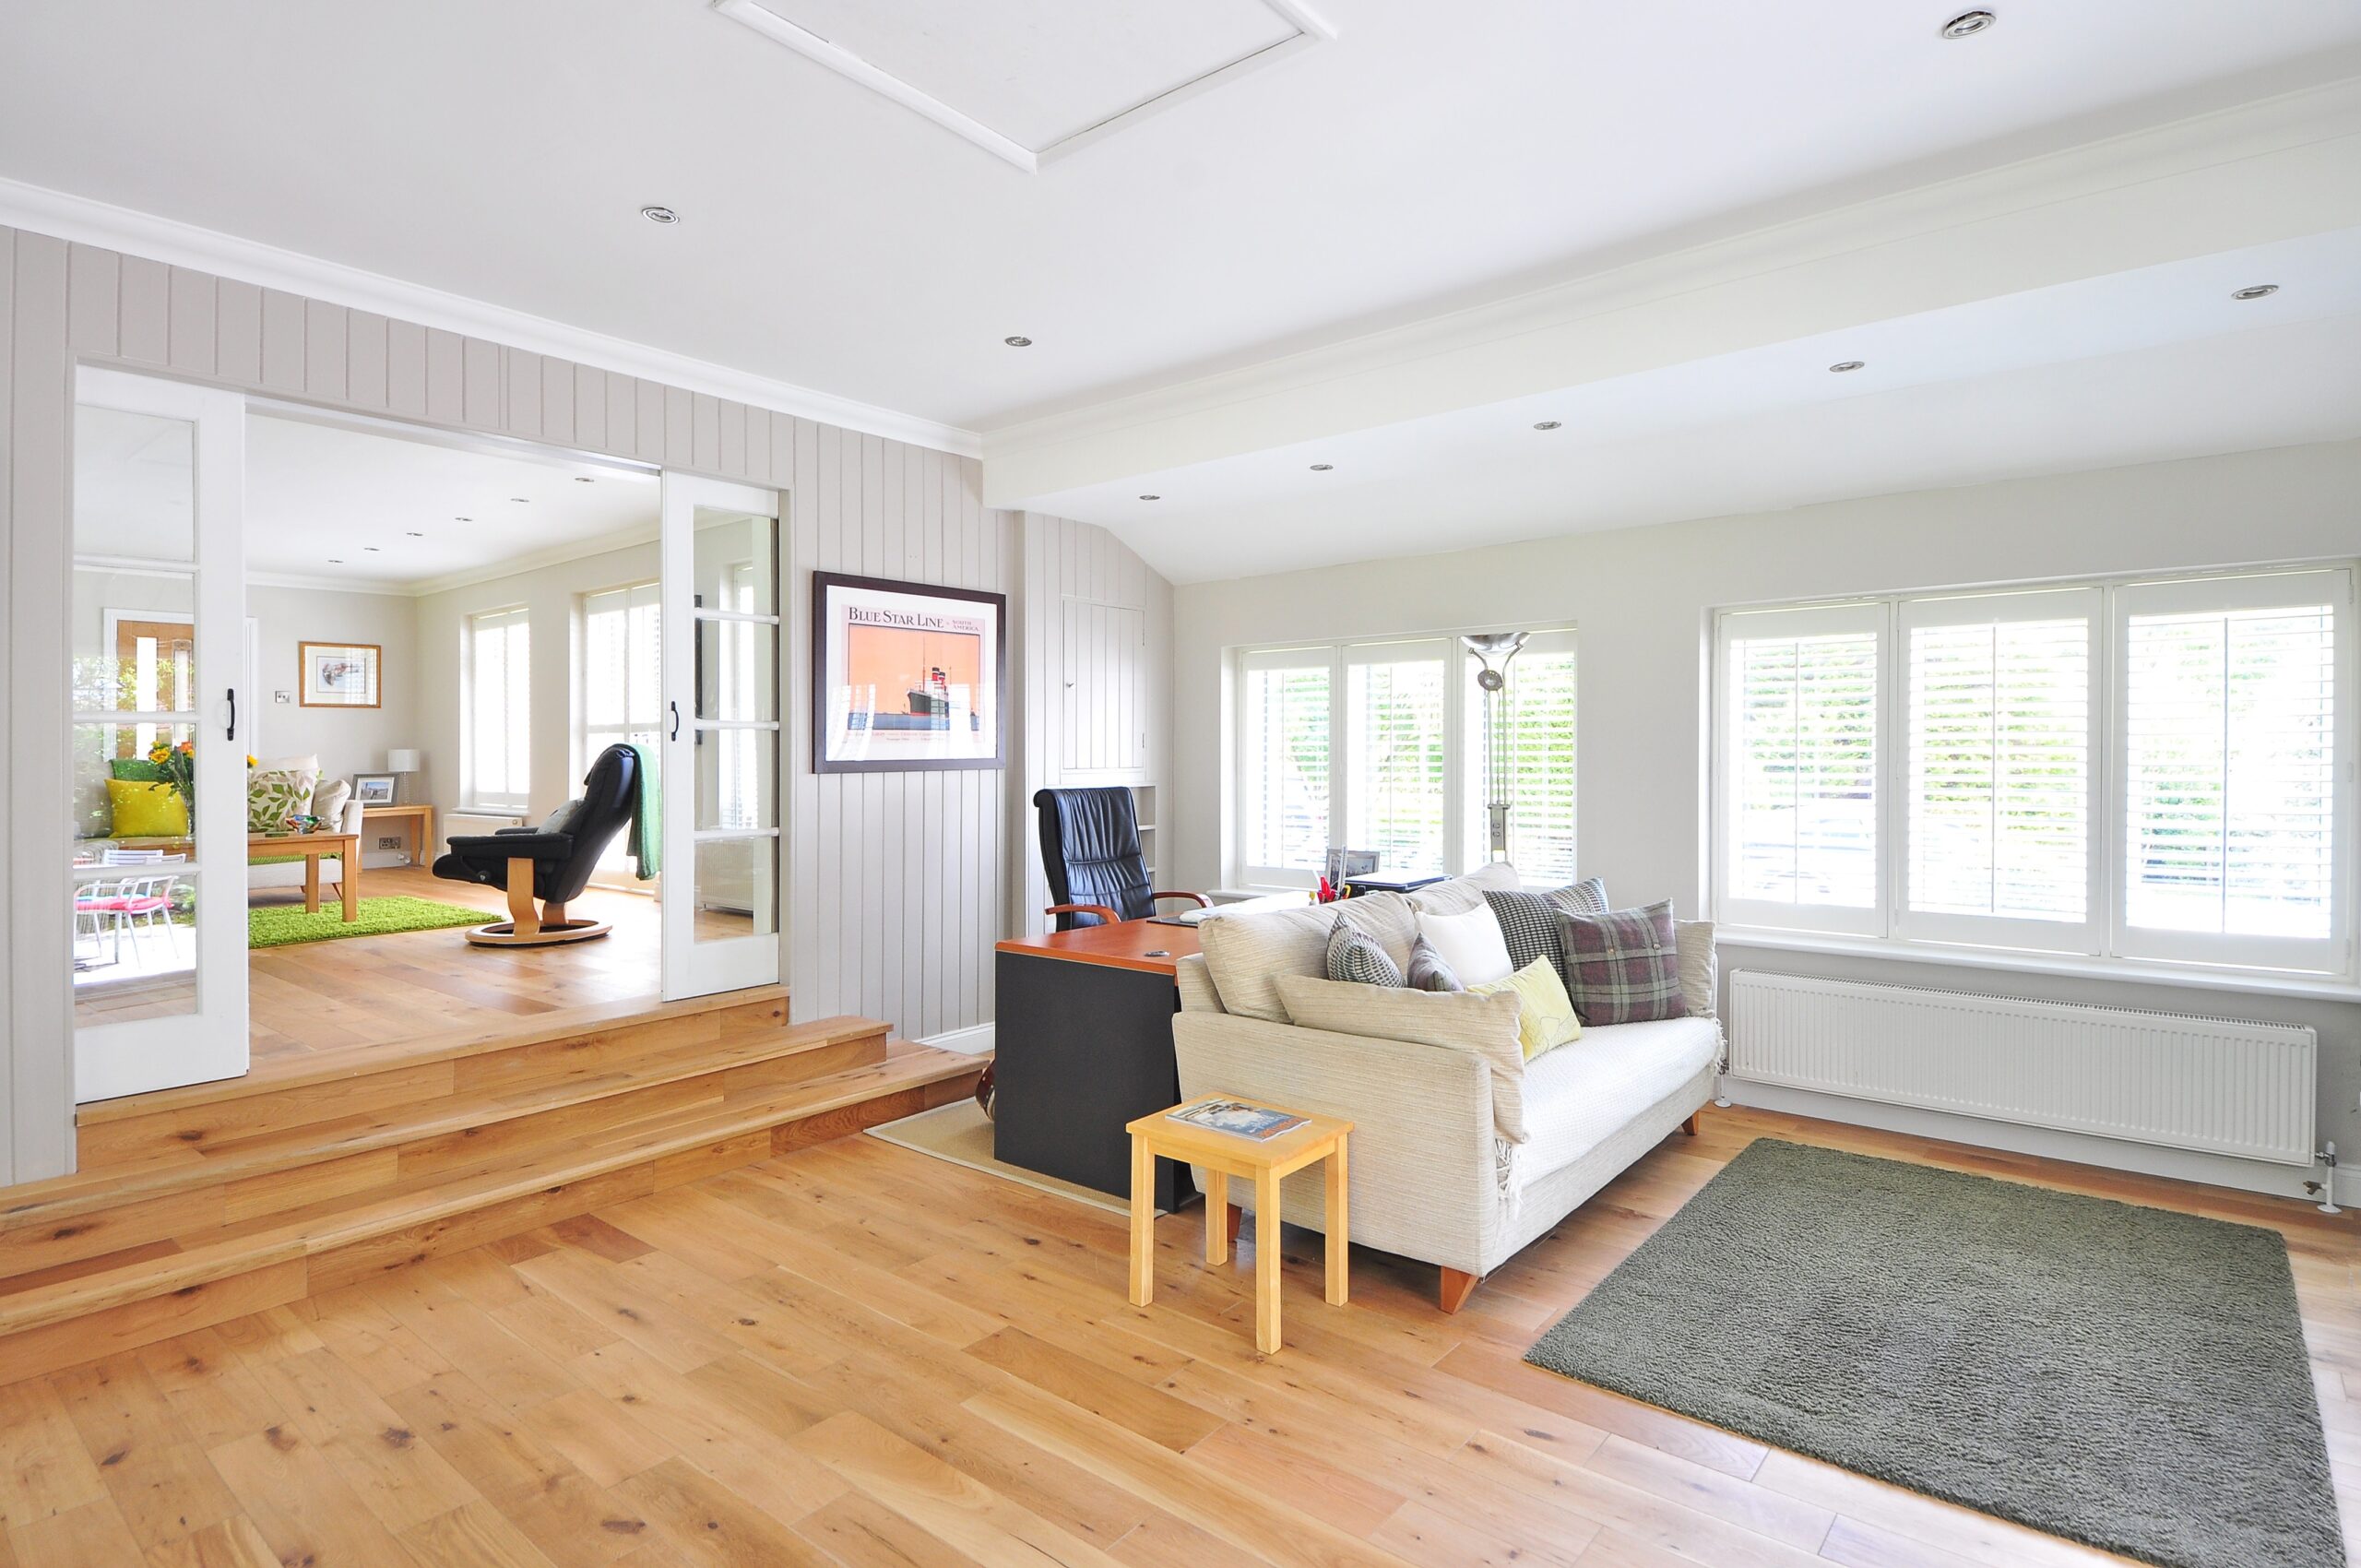 6-Mistakes-to-Avoid-When-Choosing-a-Wood-Flooring-Contractor